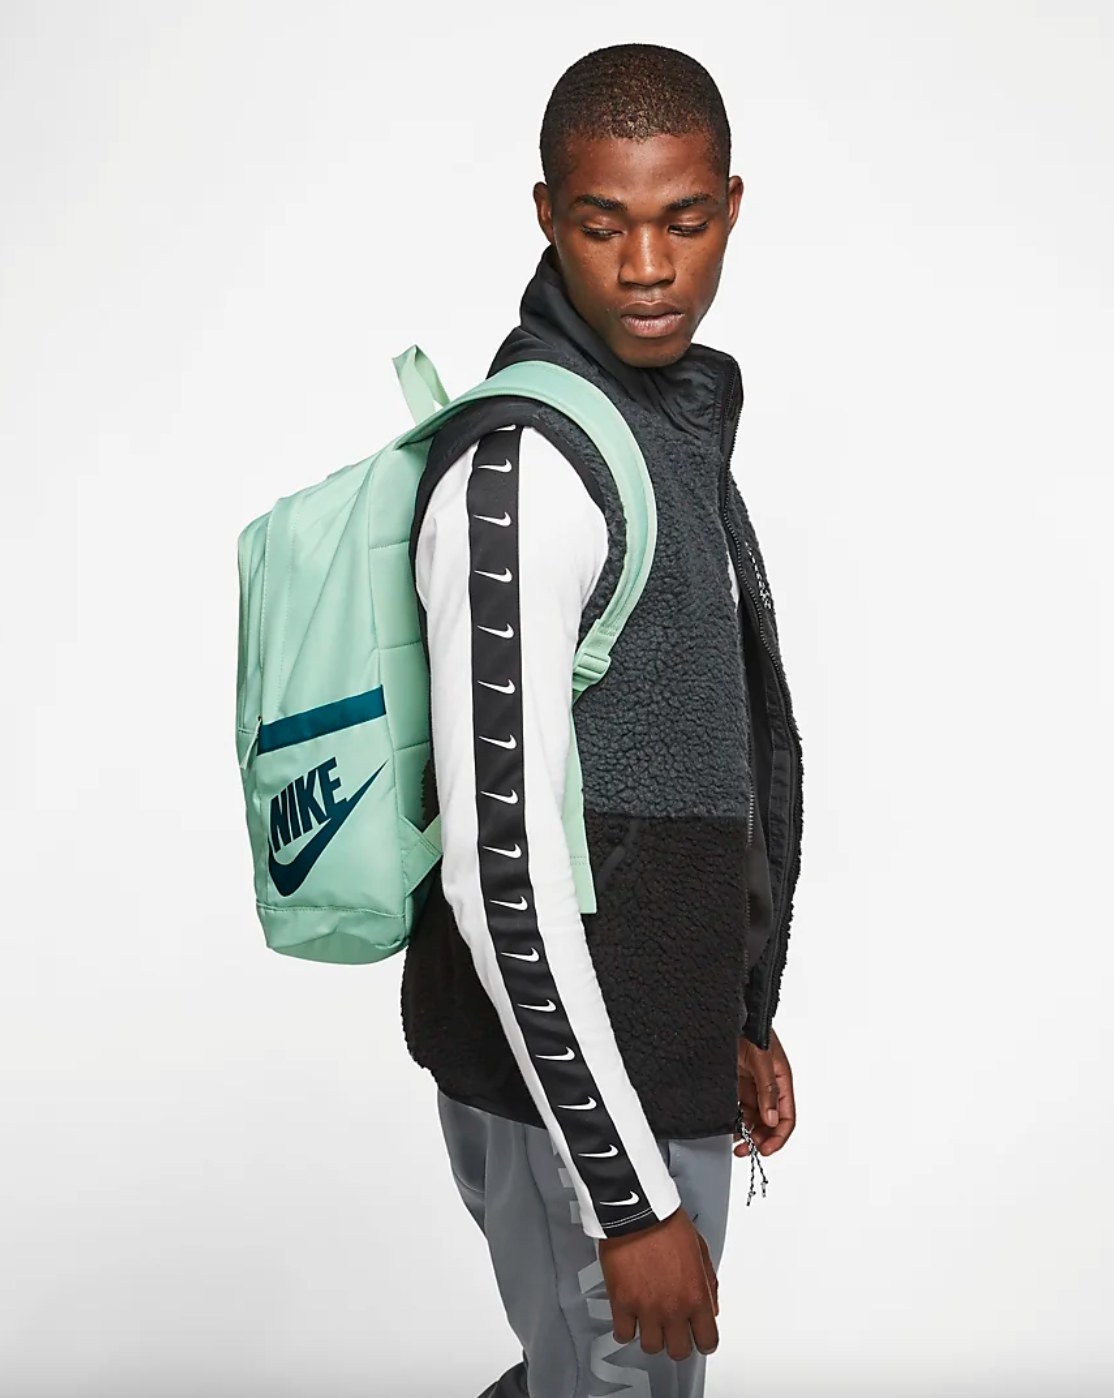 The all-access backpack in light green 